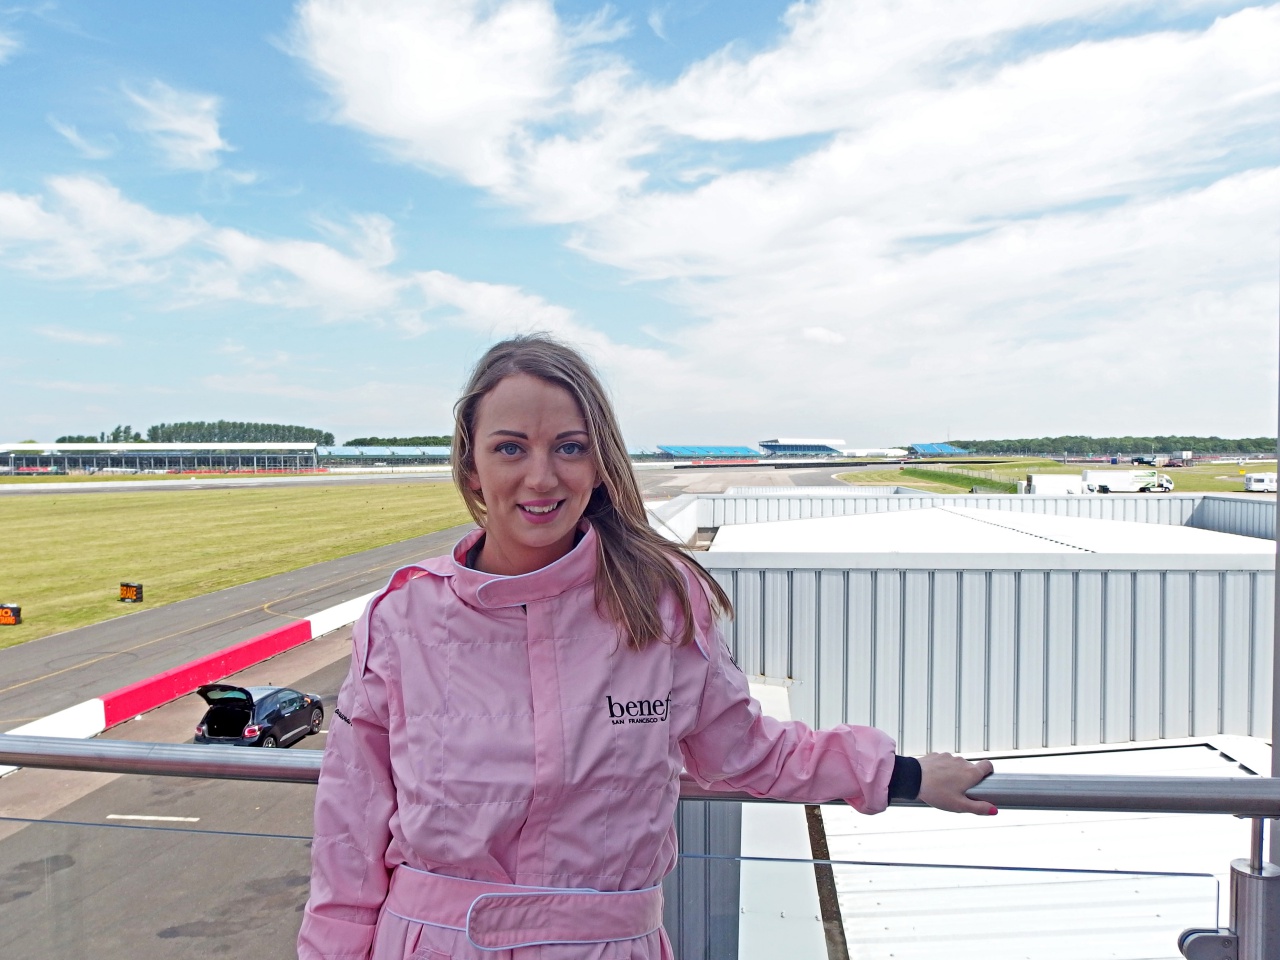 Benefit Beauty Blogger Race At Silverstone